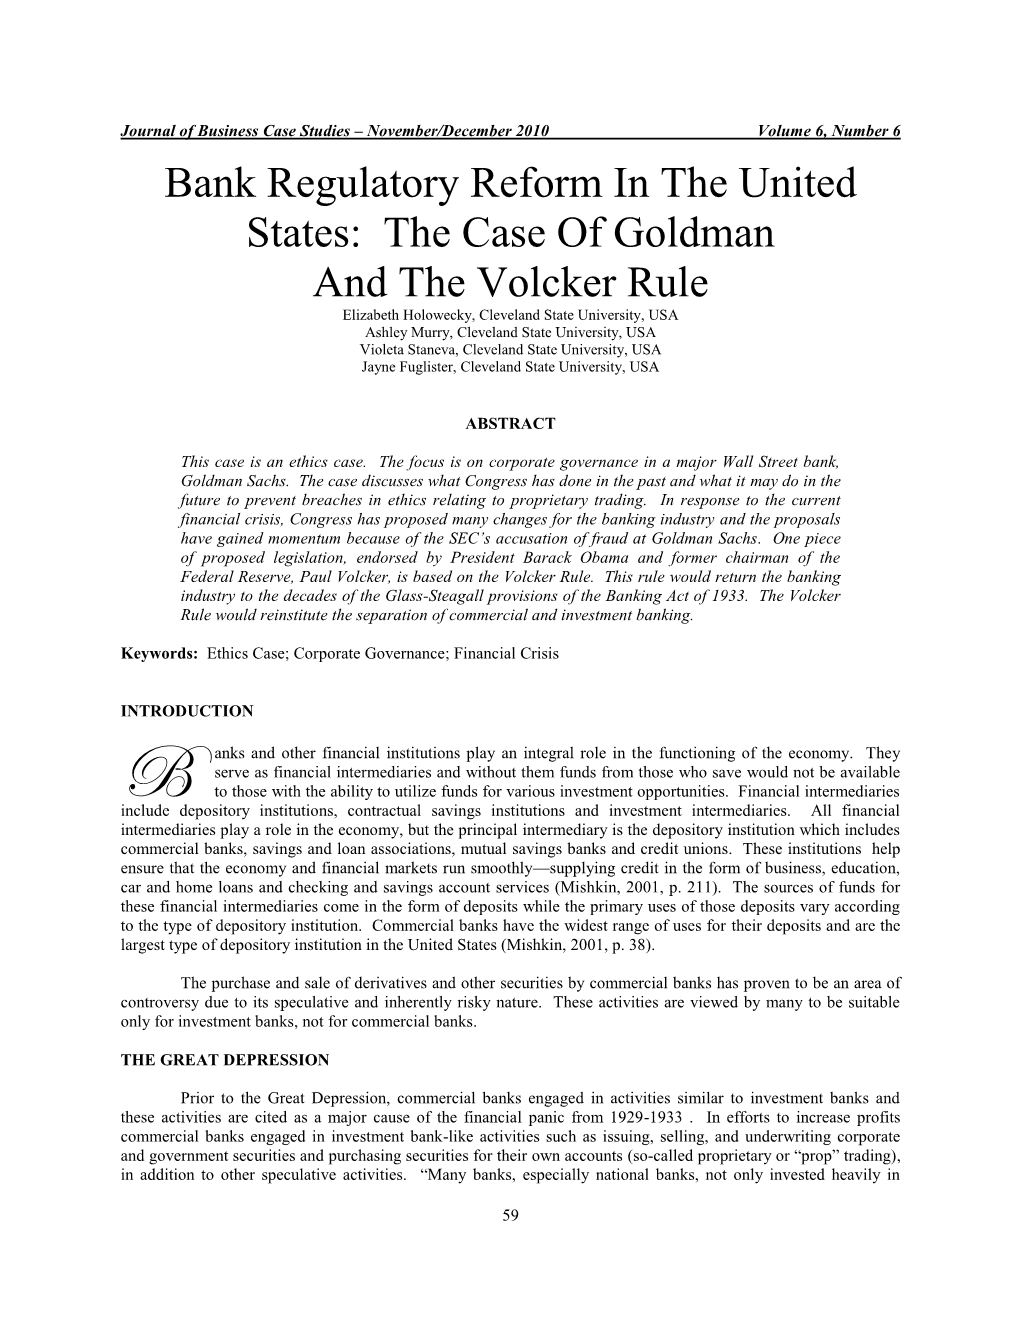 Bank Regulatory Reform in the United States